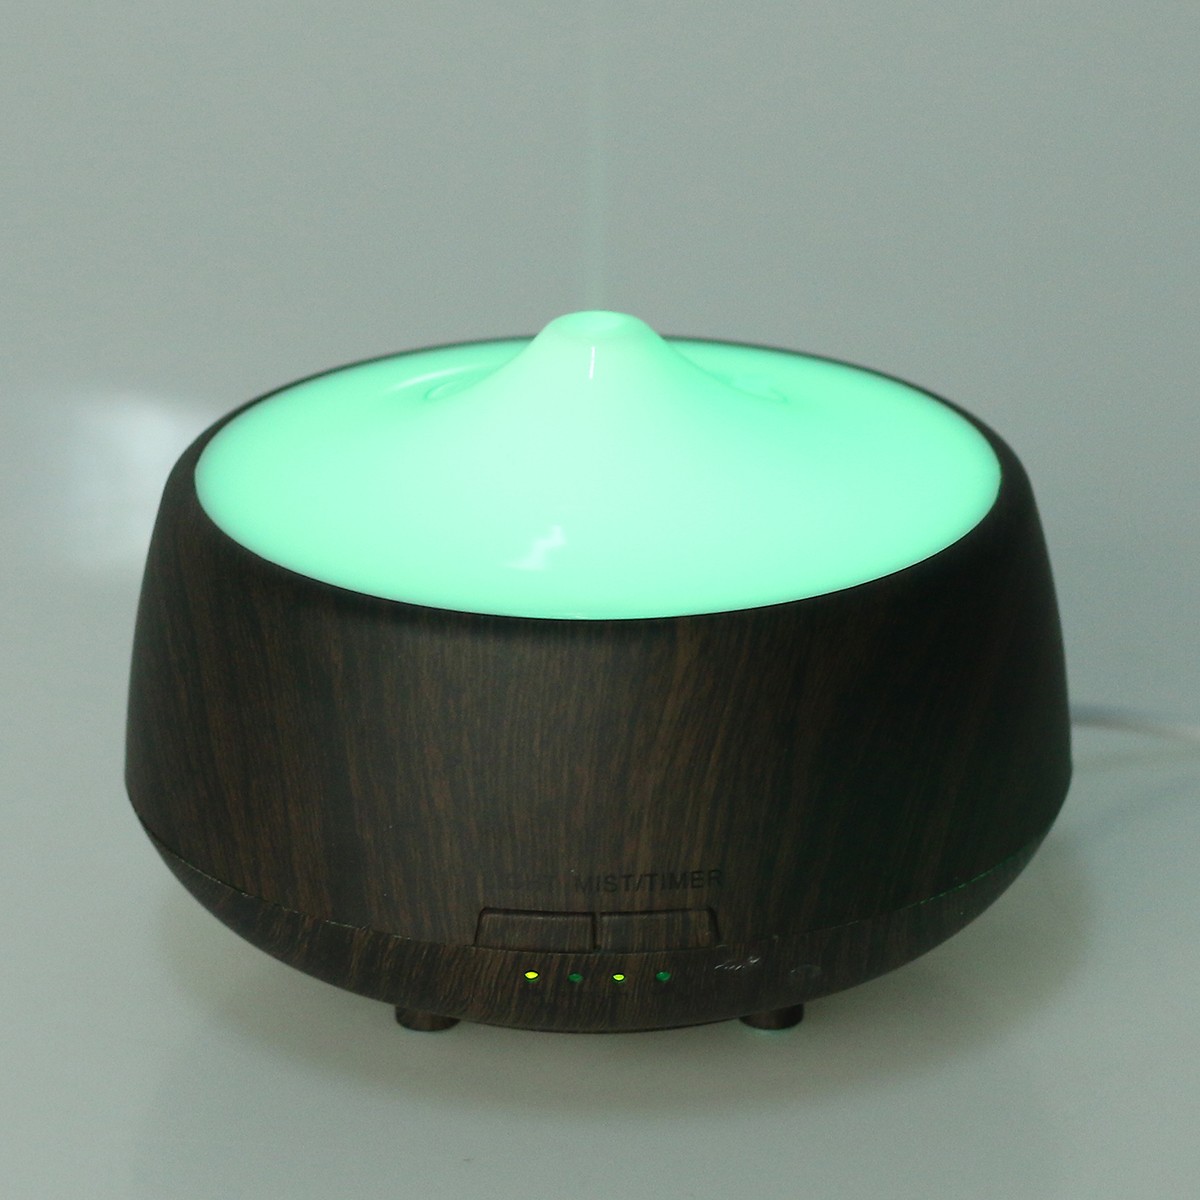 110-240V-7-Color-LED-Ultrasonic-Air-Humidifier-Aroma-Atomizer-Diffuser-Steam-Air-Purifier-1304539-7